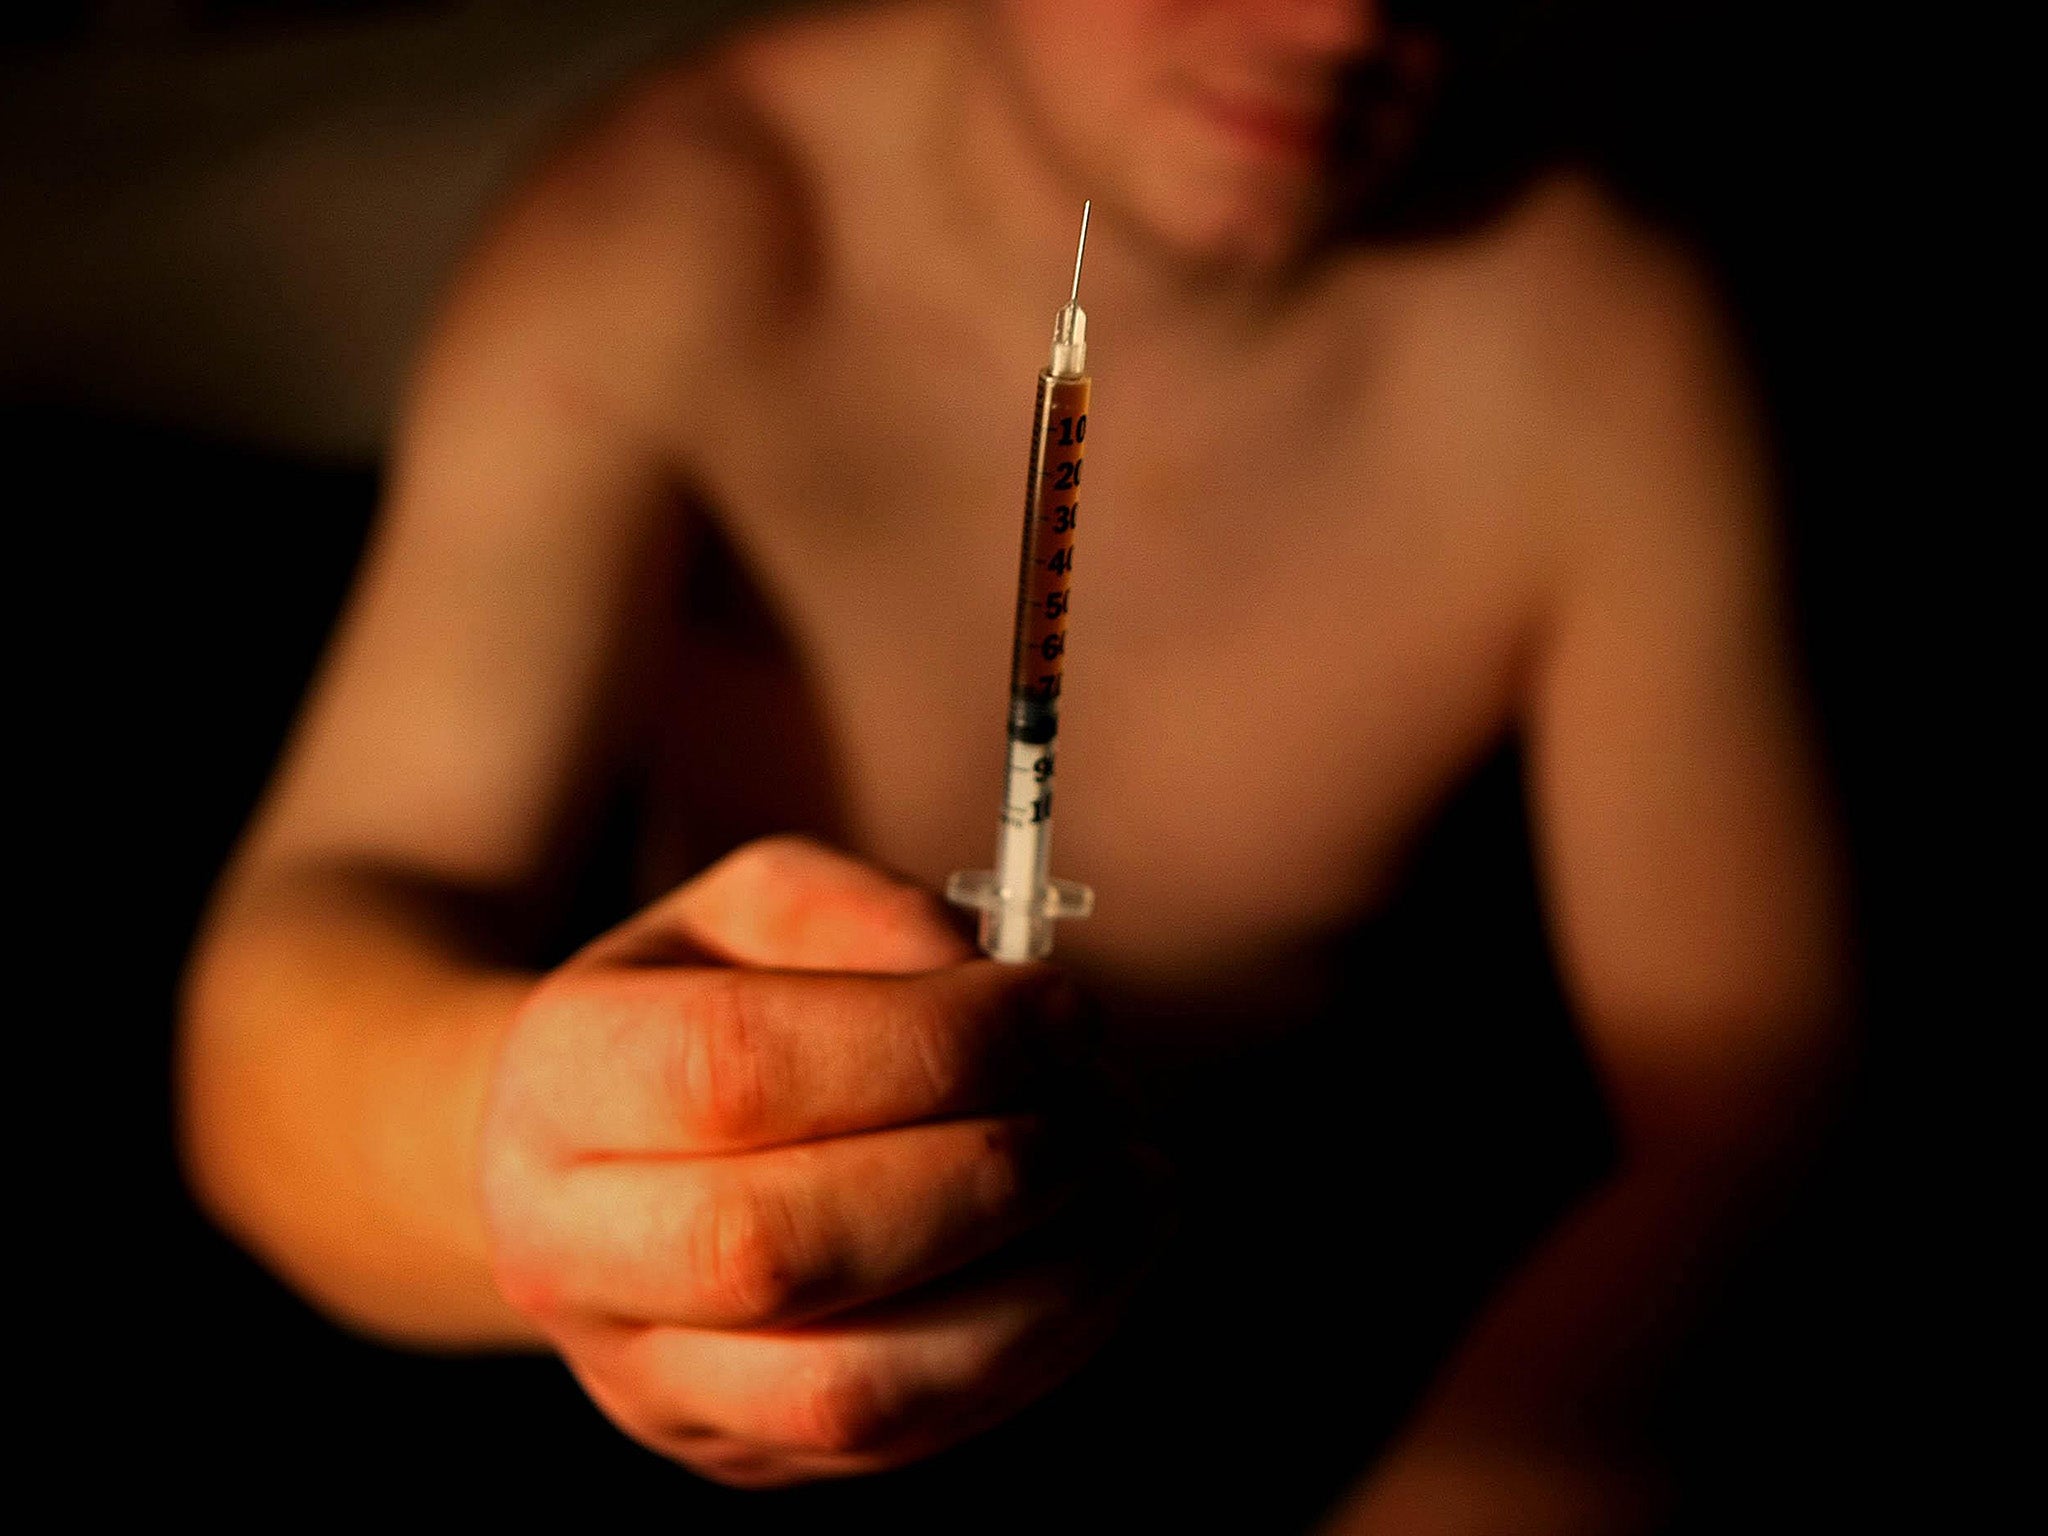 Deaths involving heroin and/or morphine have doubled over three years to reach record levels